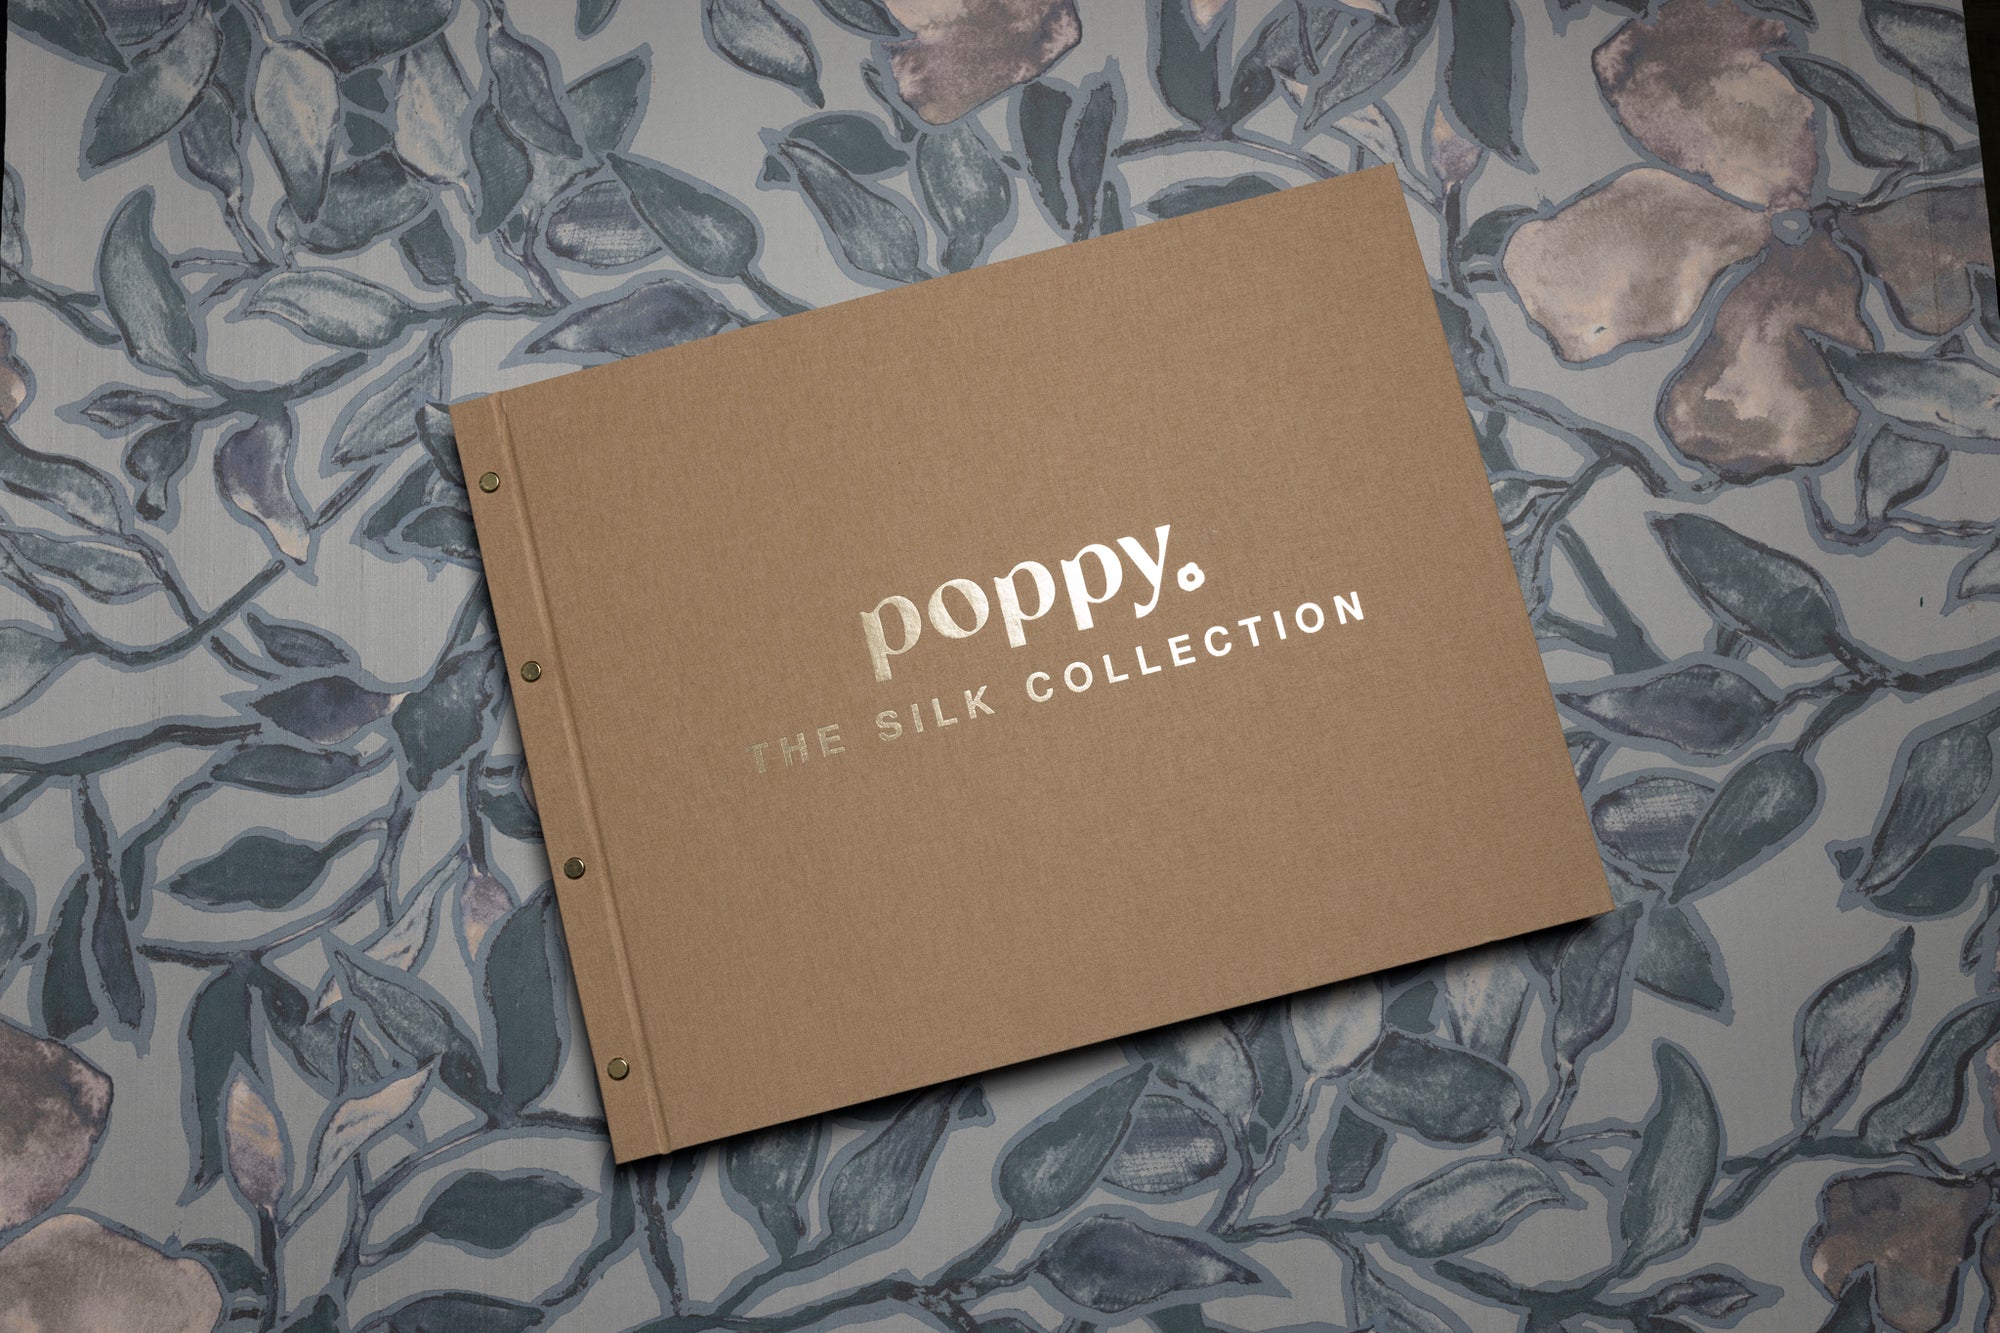 Poppy Silk Collection Sample Book Cover overlaid on wallpaper print